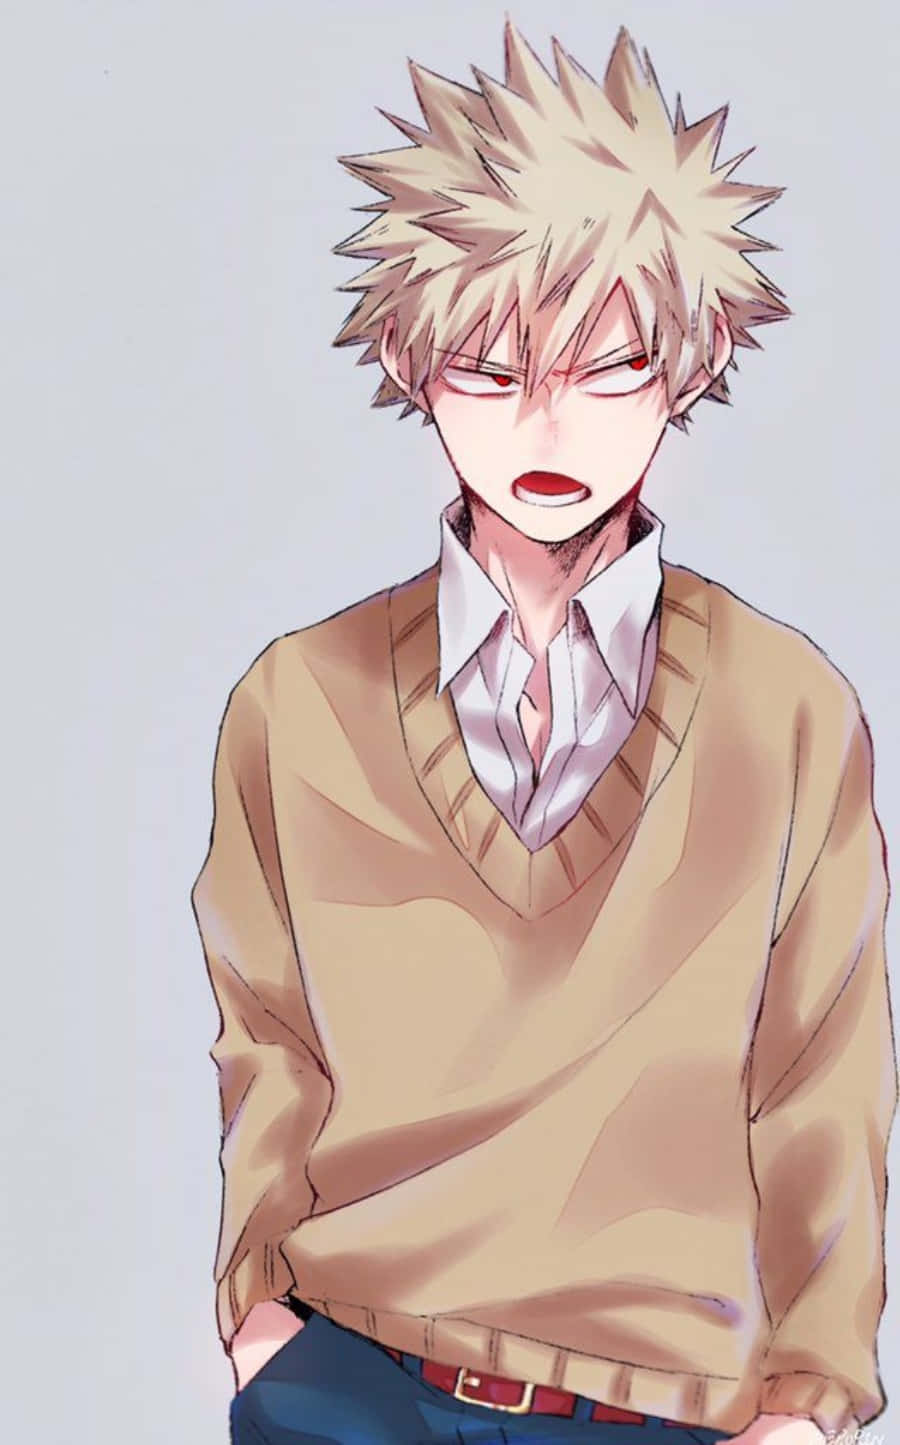 A Boy With Blonde Hair And A Sweater